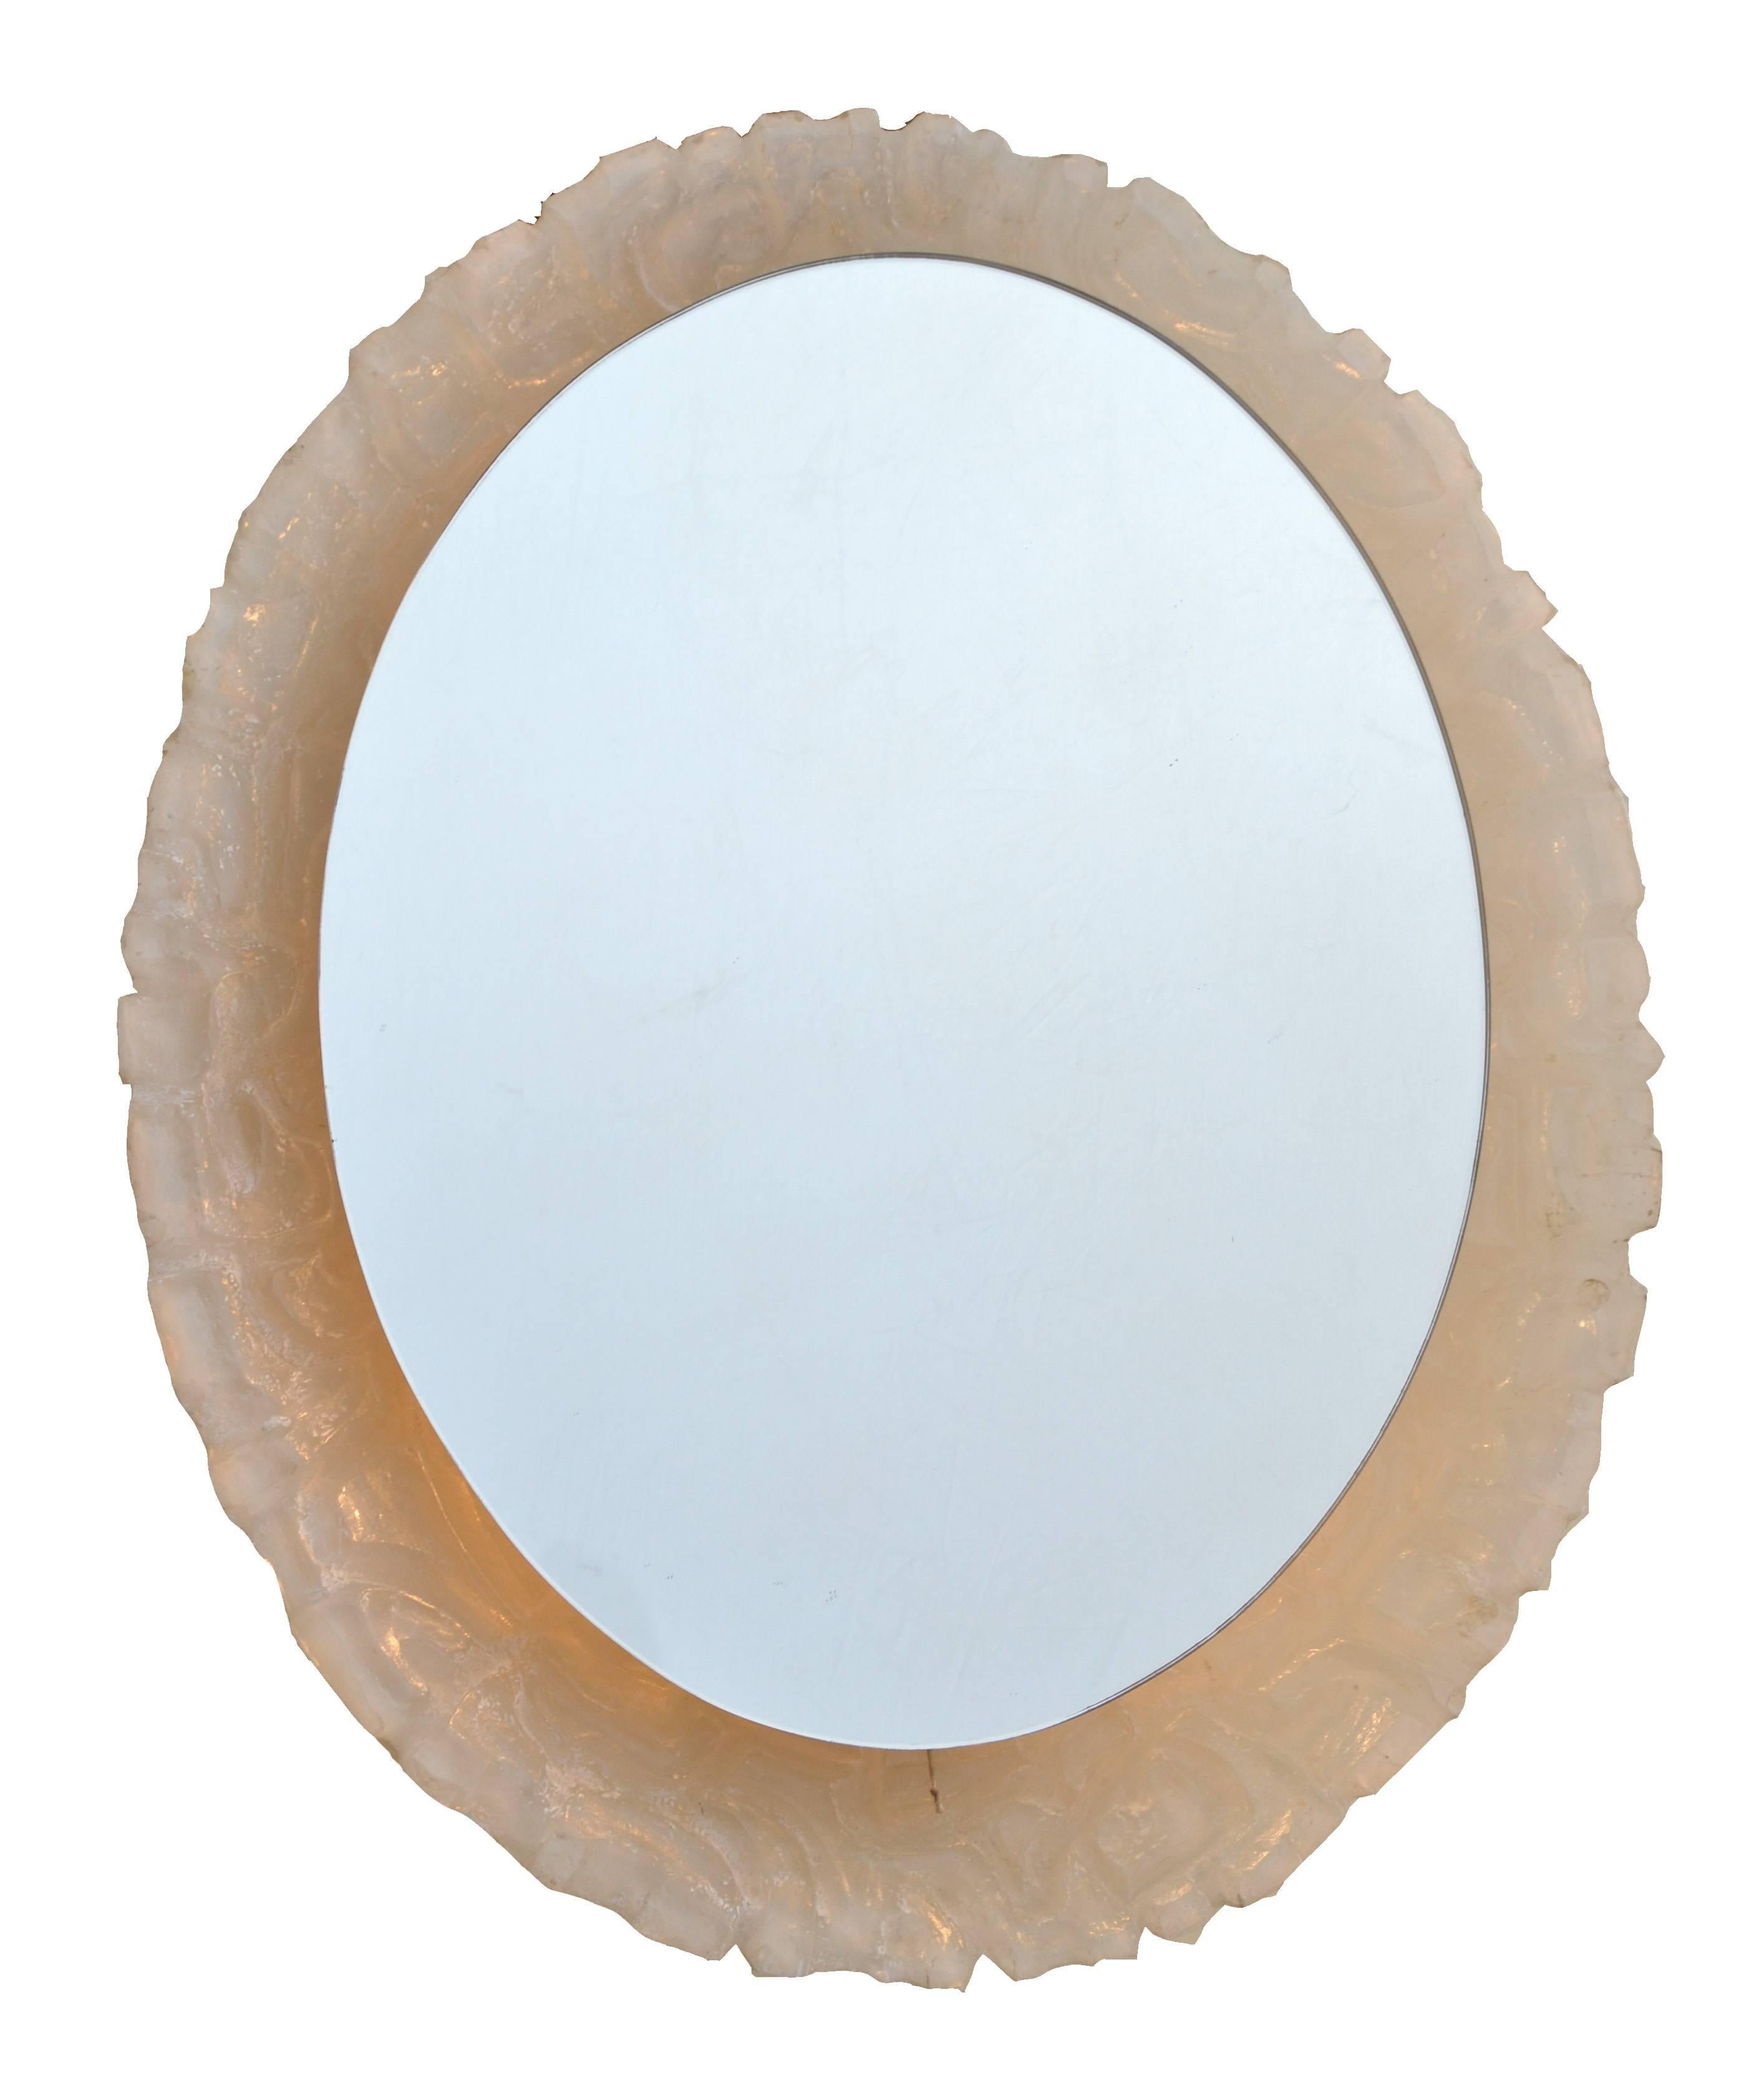 An architecturally crafted in a textural molding surround, this oval round mirror is cast of clear citron or resin with backlit lighting. Recently rewired.